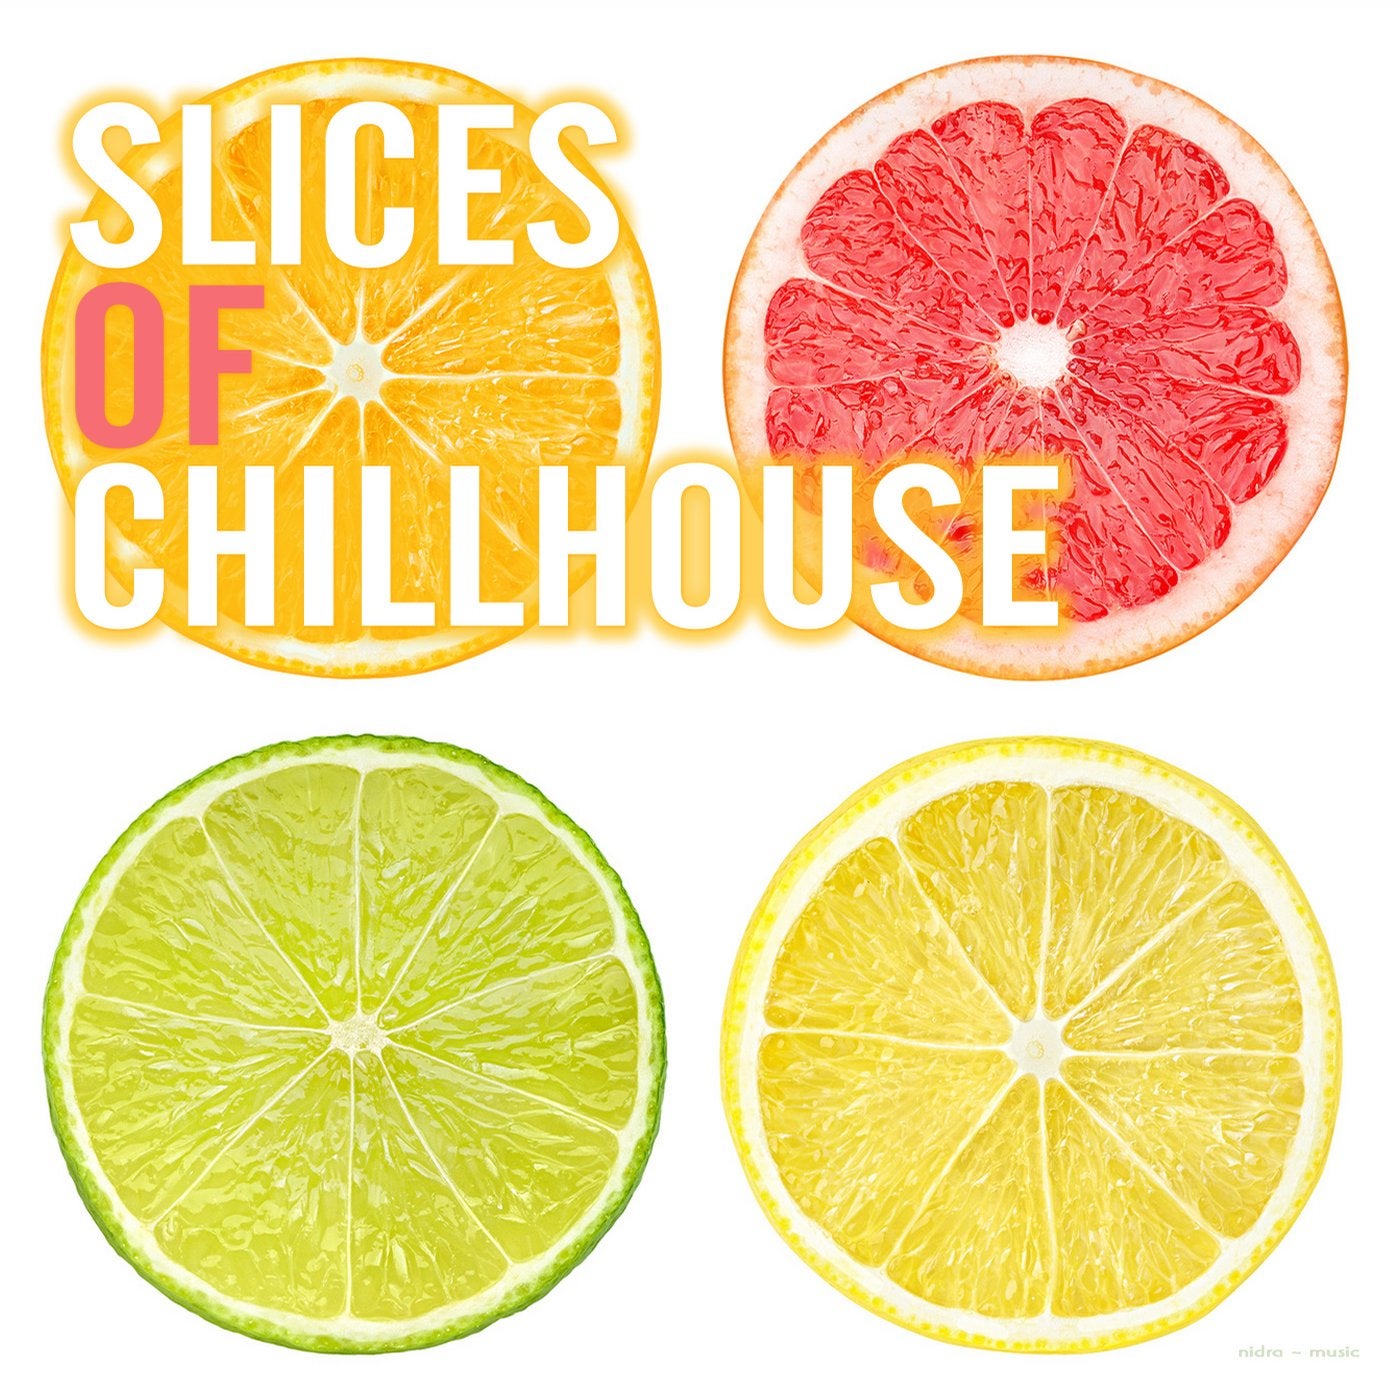 Slices of Chillhouse